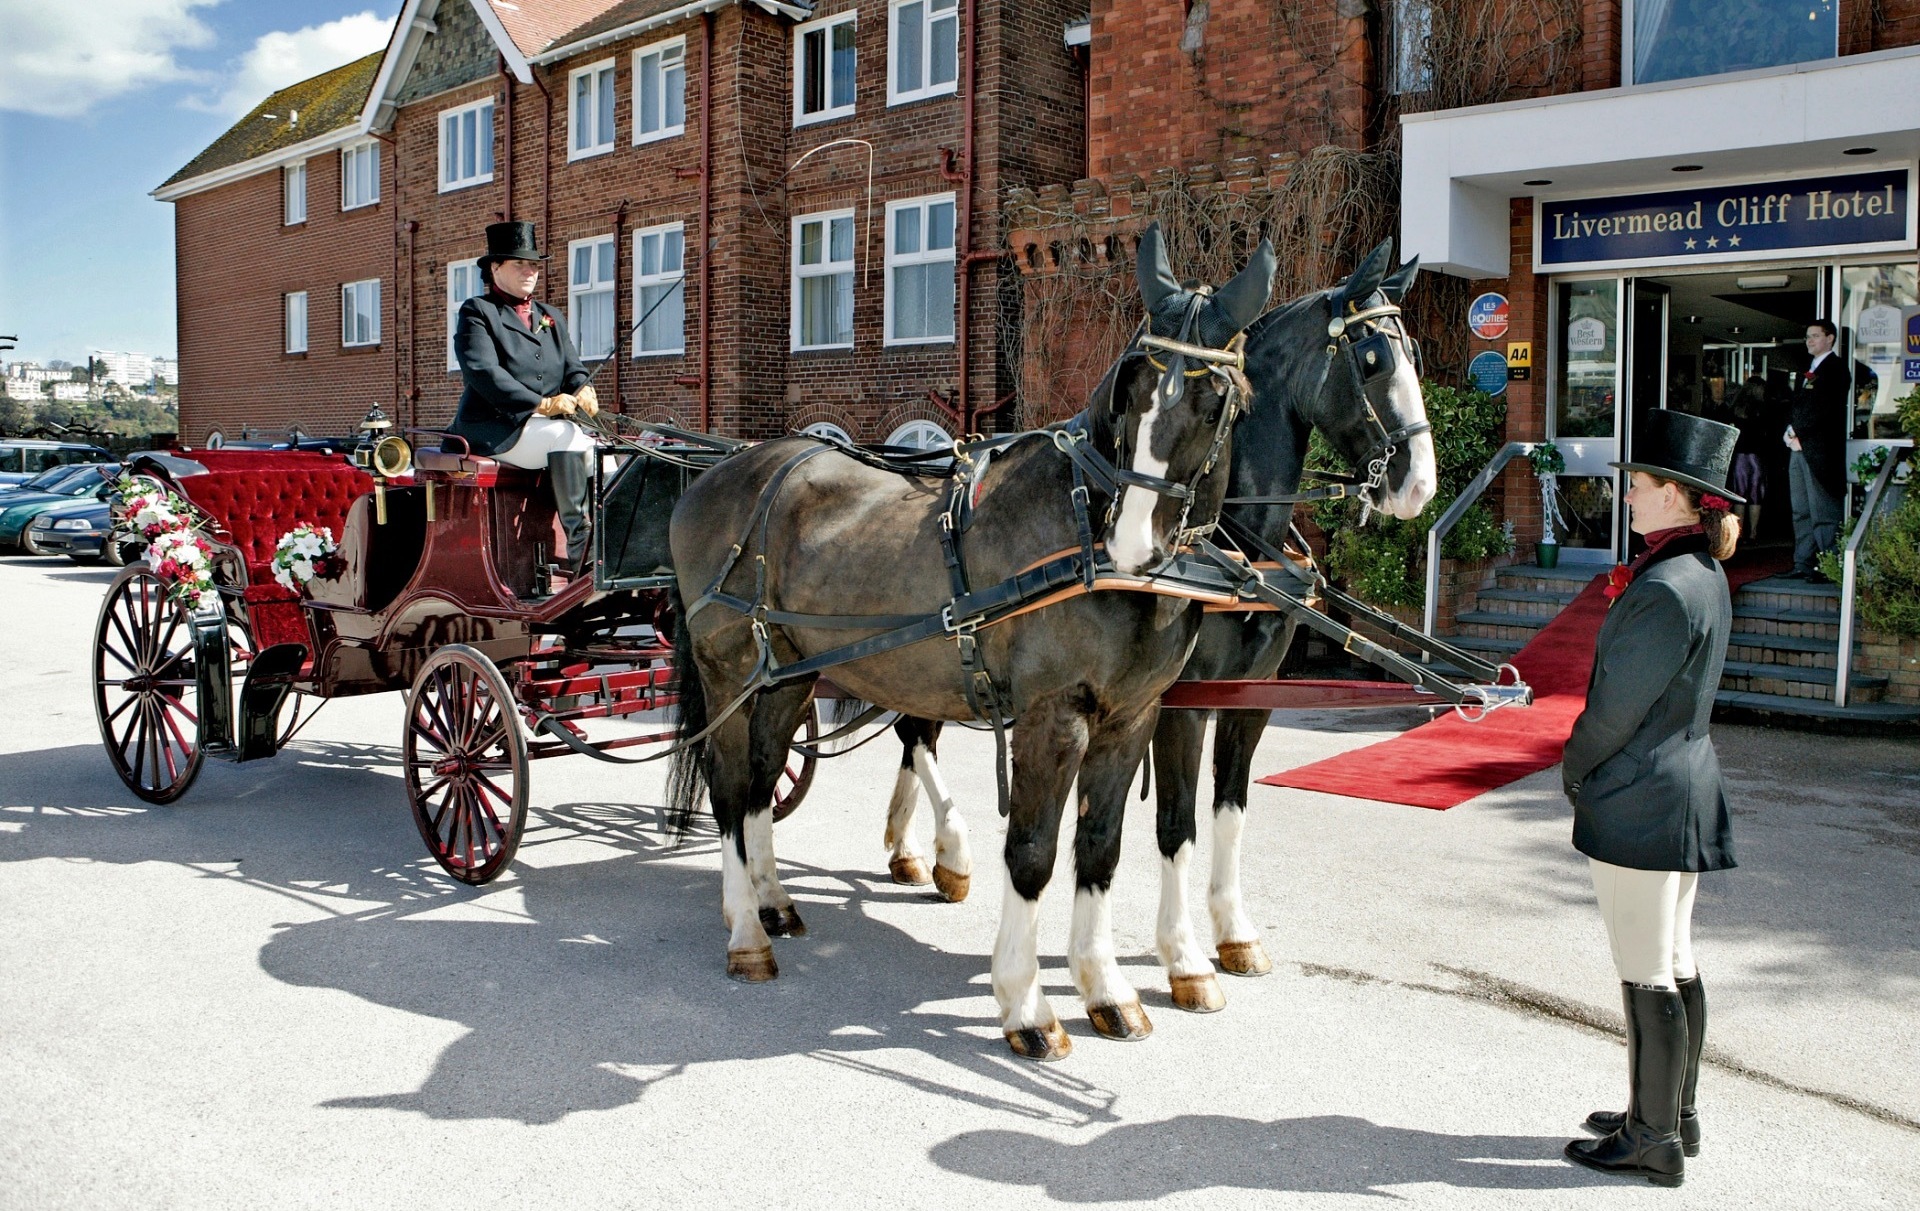 Coach and horses outside the Livermead Cliff Hotel